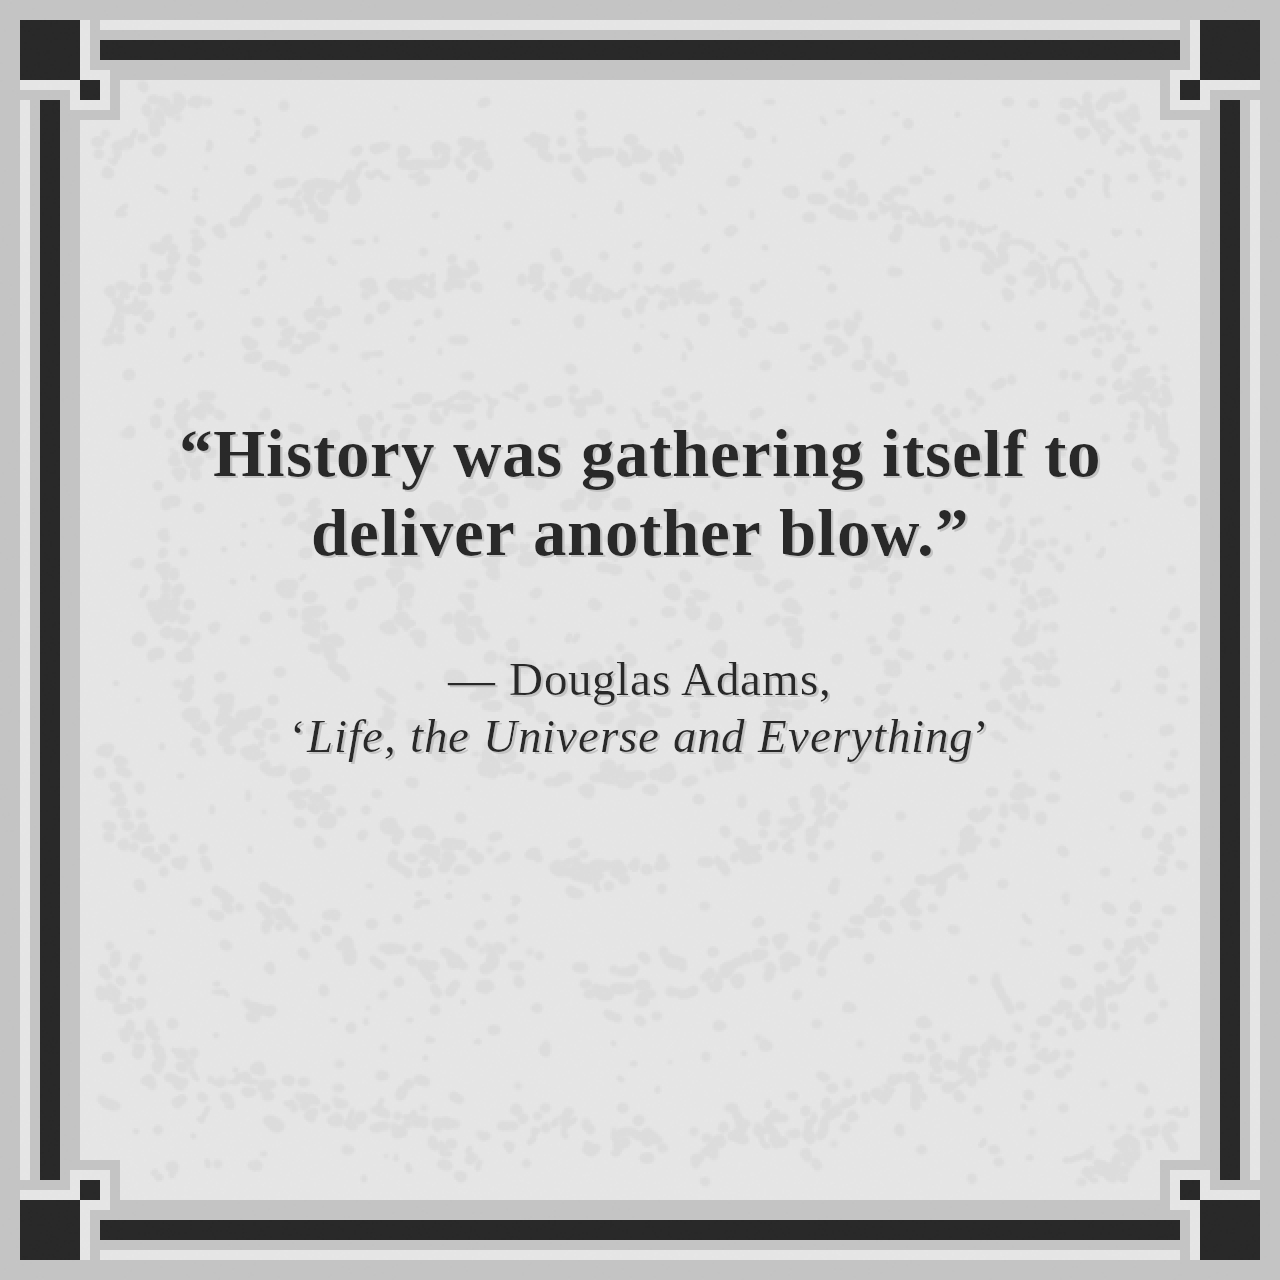 “History was gathering itself to deliver another blow.”

— Douglas Adams, ‘Life, the Universe and Everything’